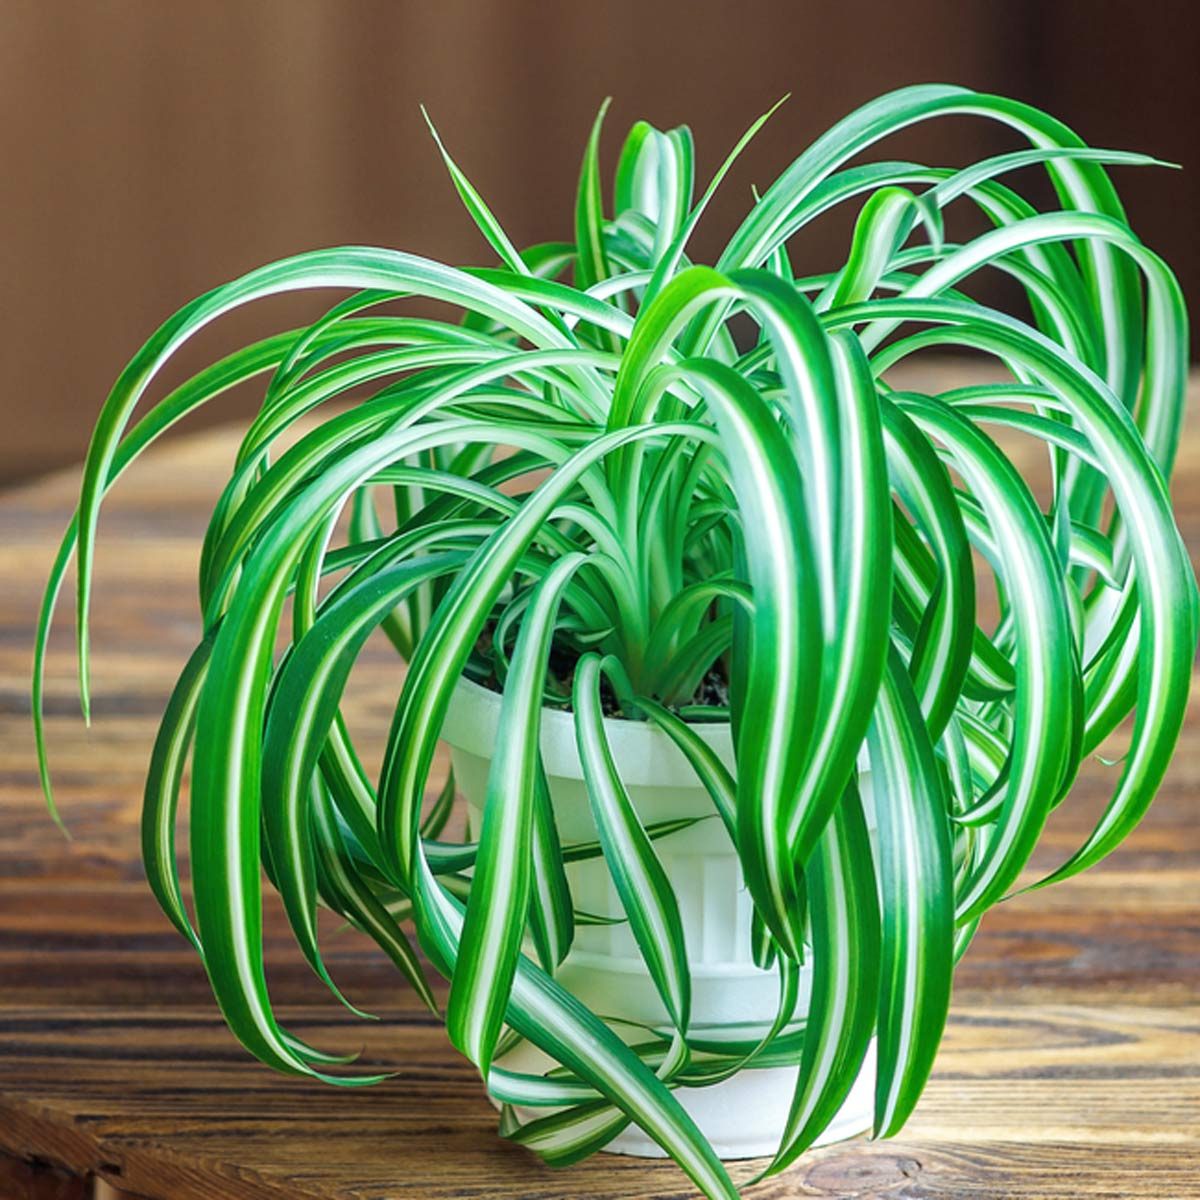 10 Nontoxic Houseplants That are Safe for Your Pets